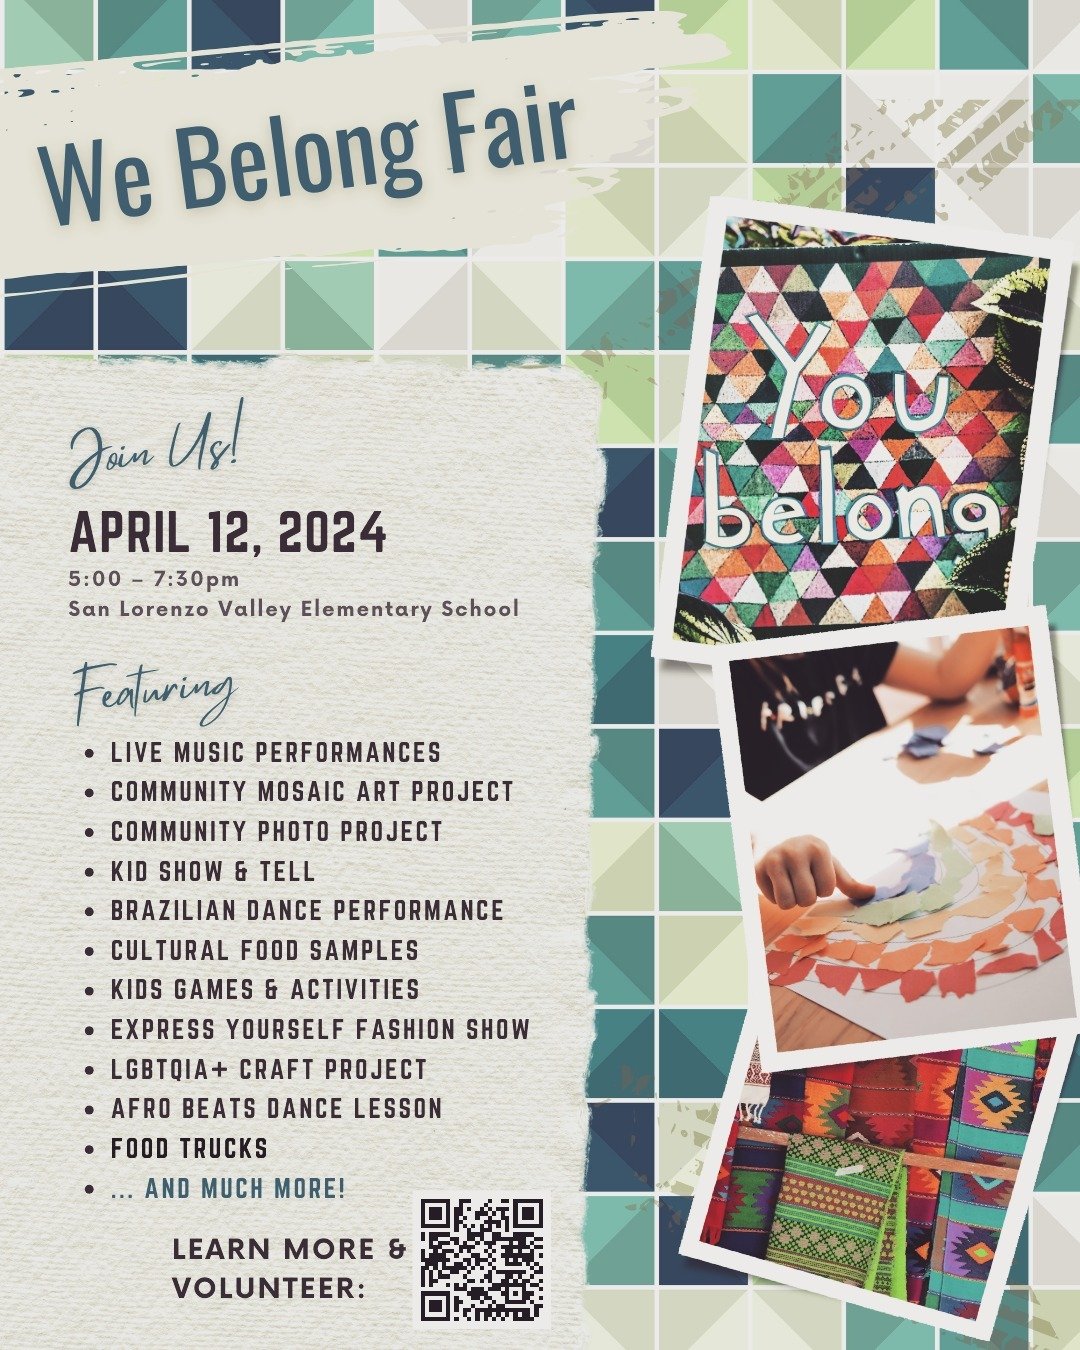 Join @auntlali and @cococthefoodtruck and more tomorrow night at the first We Belong Fair at SLV Elementary. A beautiful way to welcome the weekend! #webelongfair #foodtruckfriday #familyeventssantacruz #icecreamtruck #slvbobcat